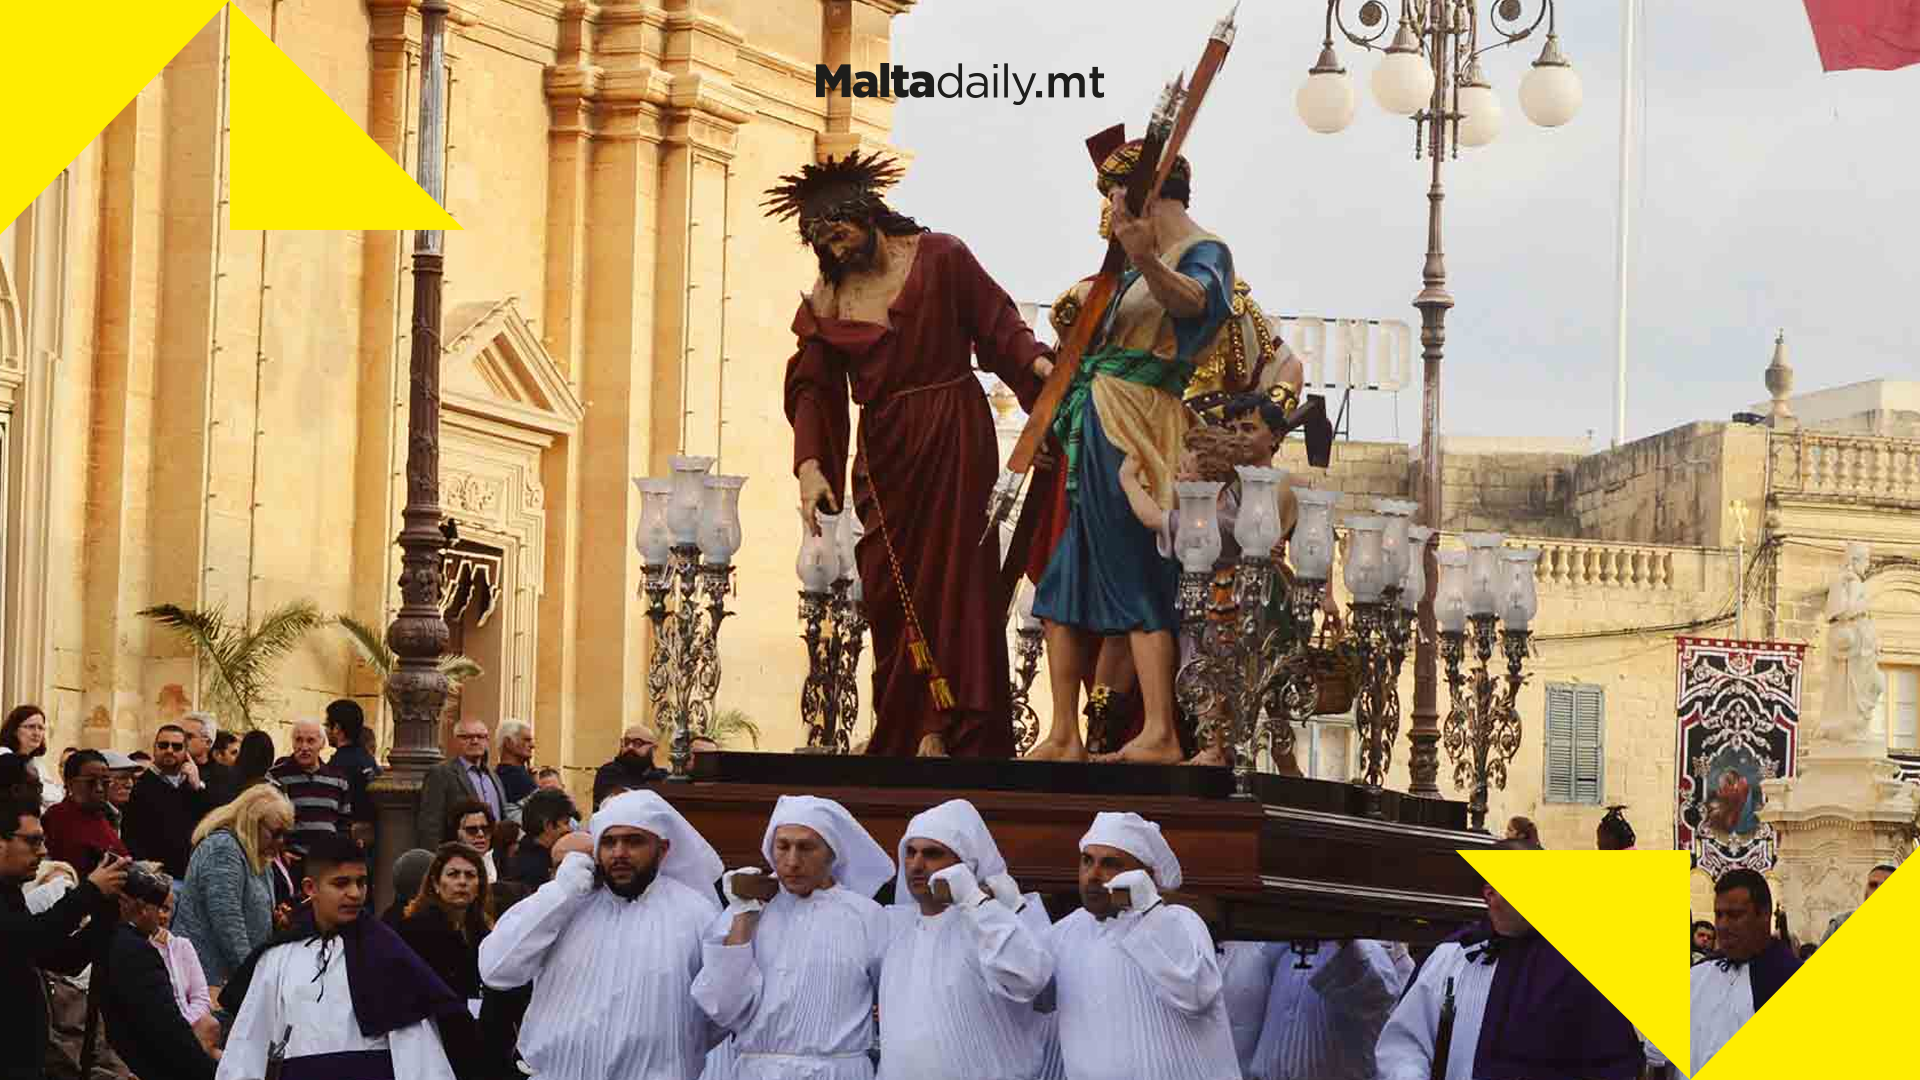 A return to Good Friday processions after COVID pandemic